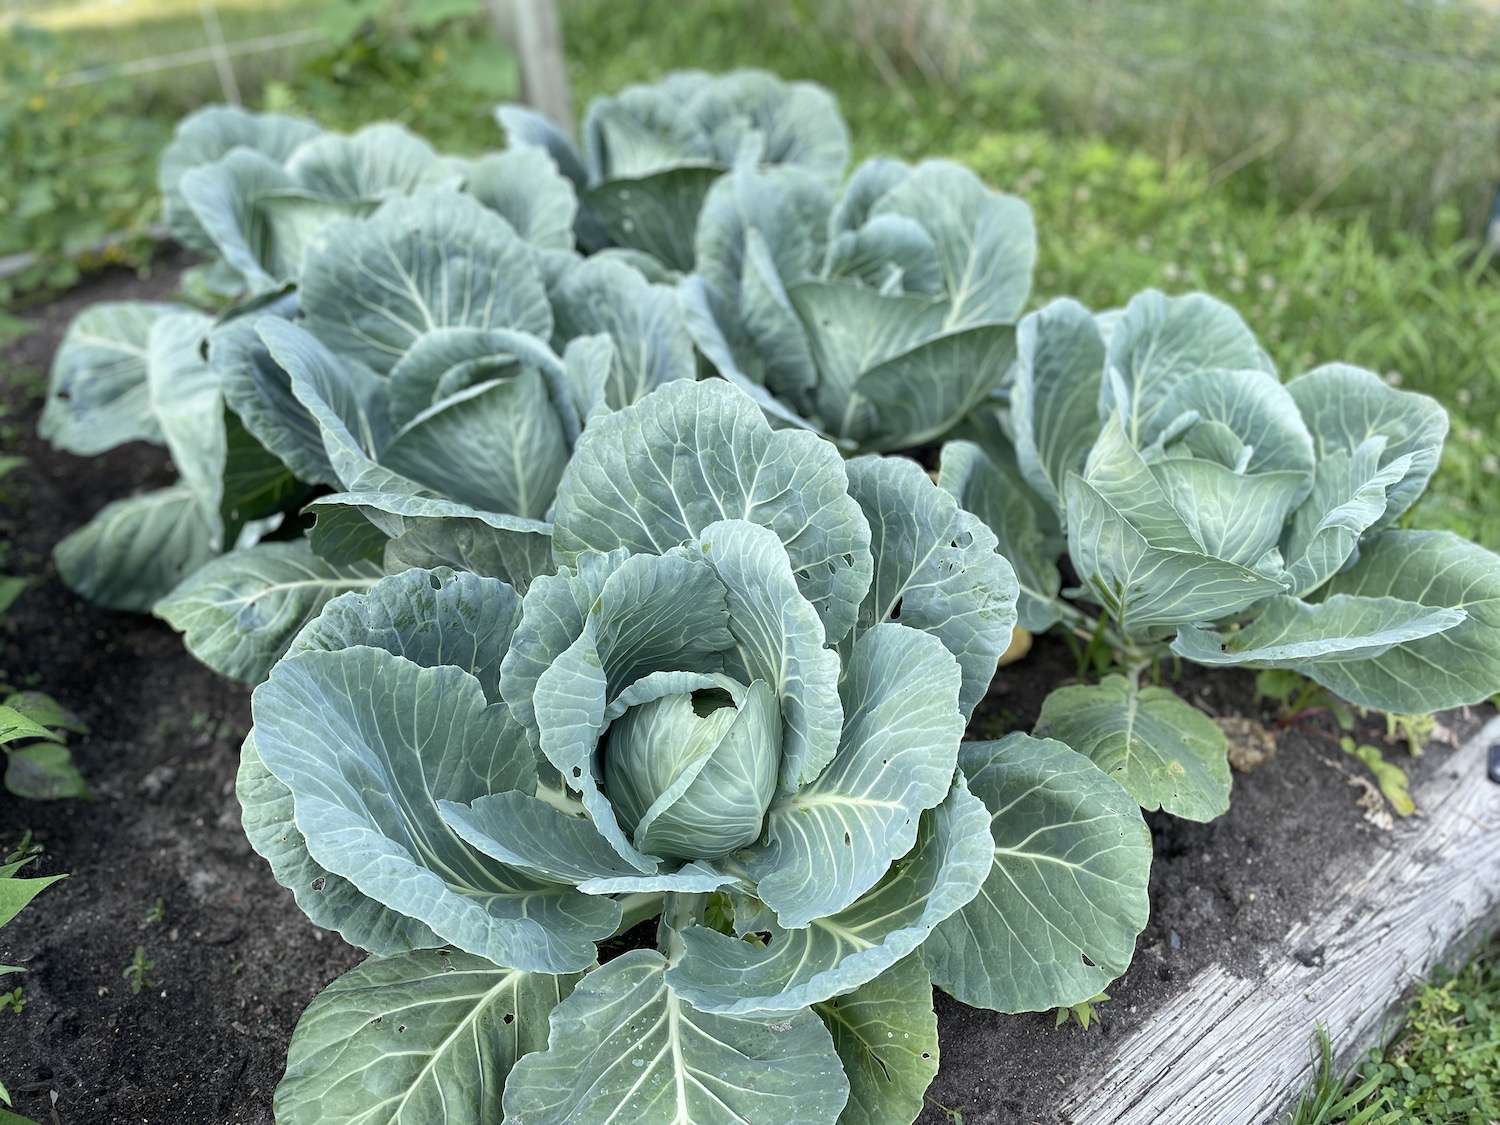 Cabbage plants in the garden